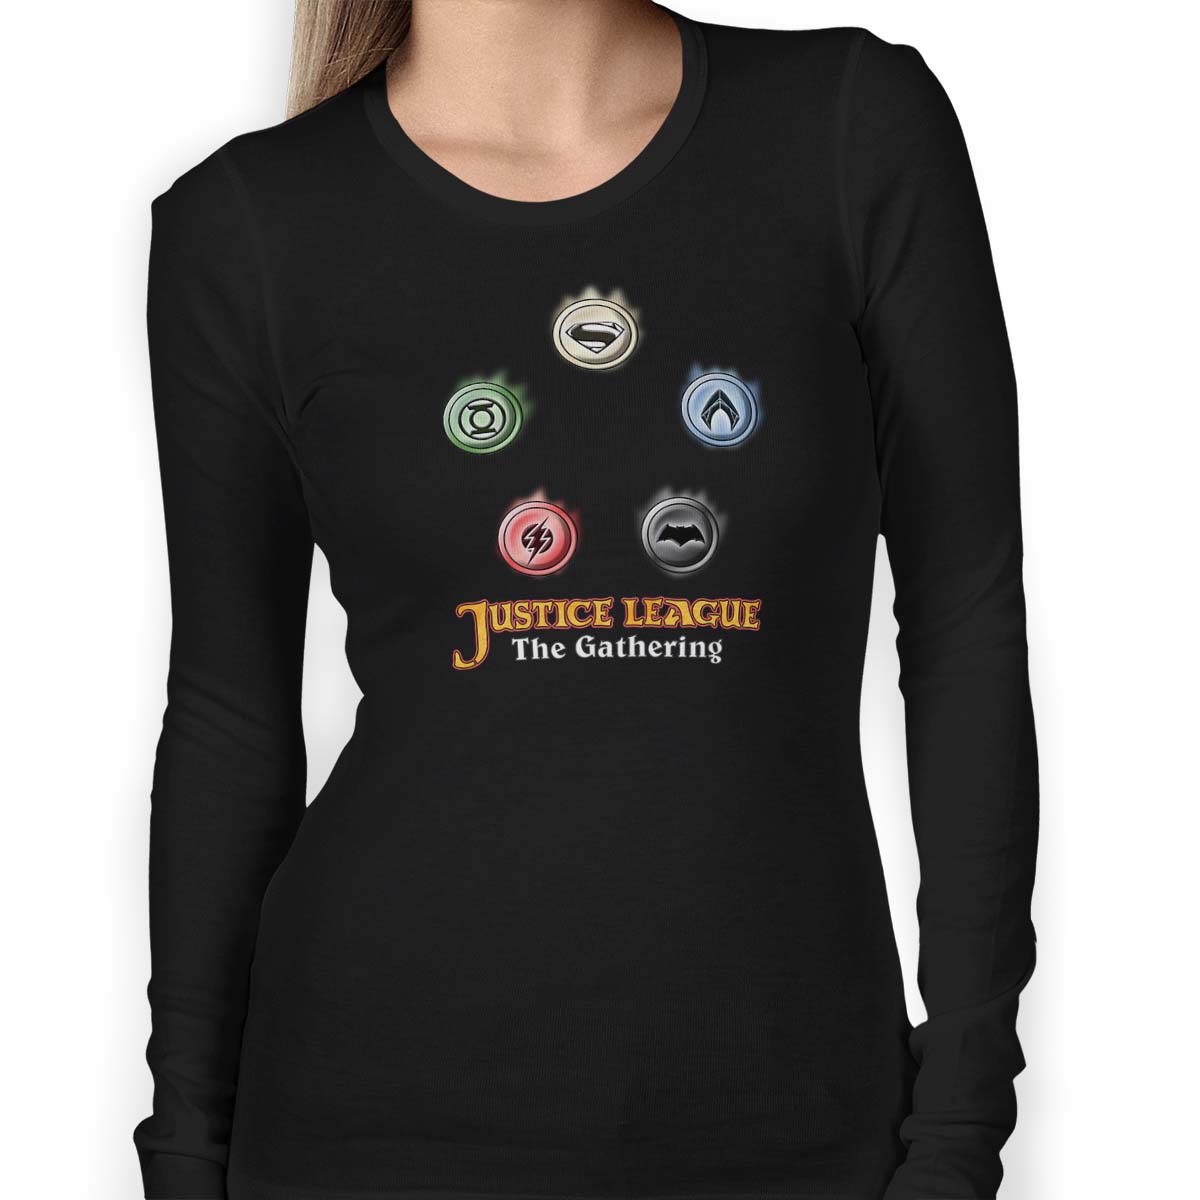 Justice League The Gathering Women's Long Sleeve Tee